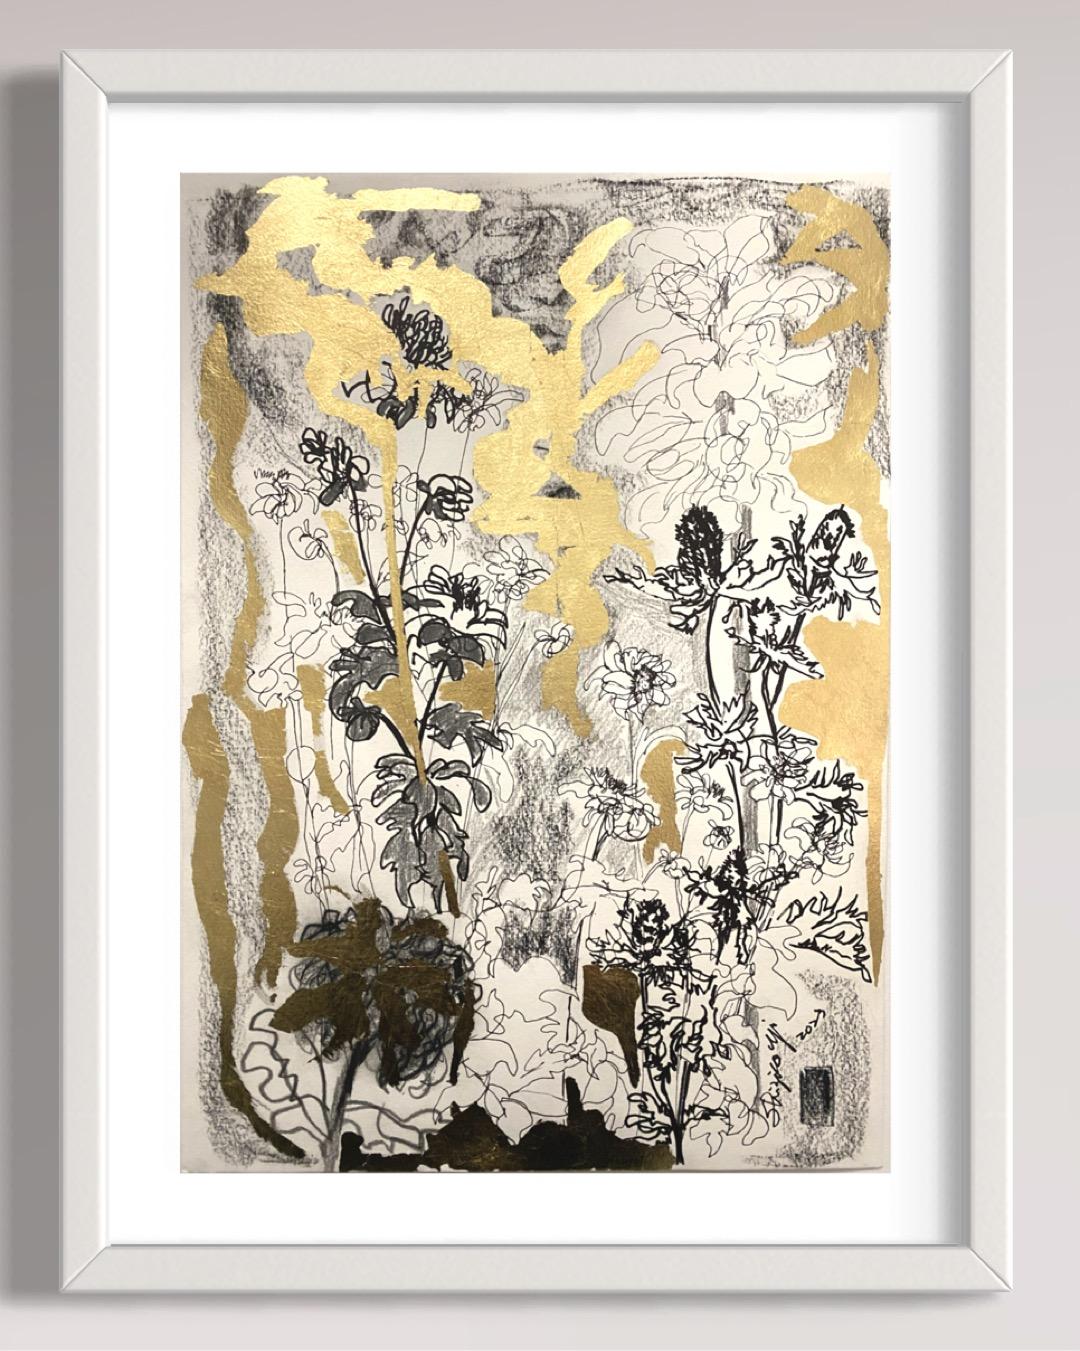 Rare chance to own an original drawing by Shizico yi.
Drawings are the most intimate works of Shizico Yi, therefore it is rare to have a few coming to the market and be available. 
This is a drawing made plein air in her garden in early autumn’s